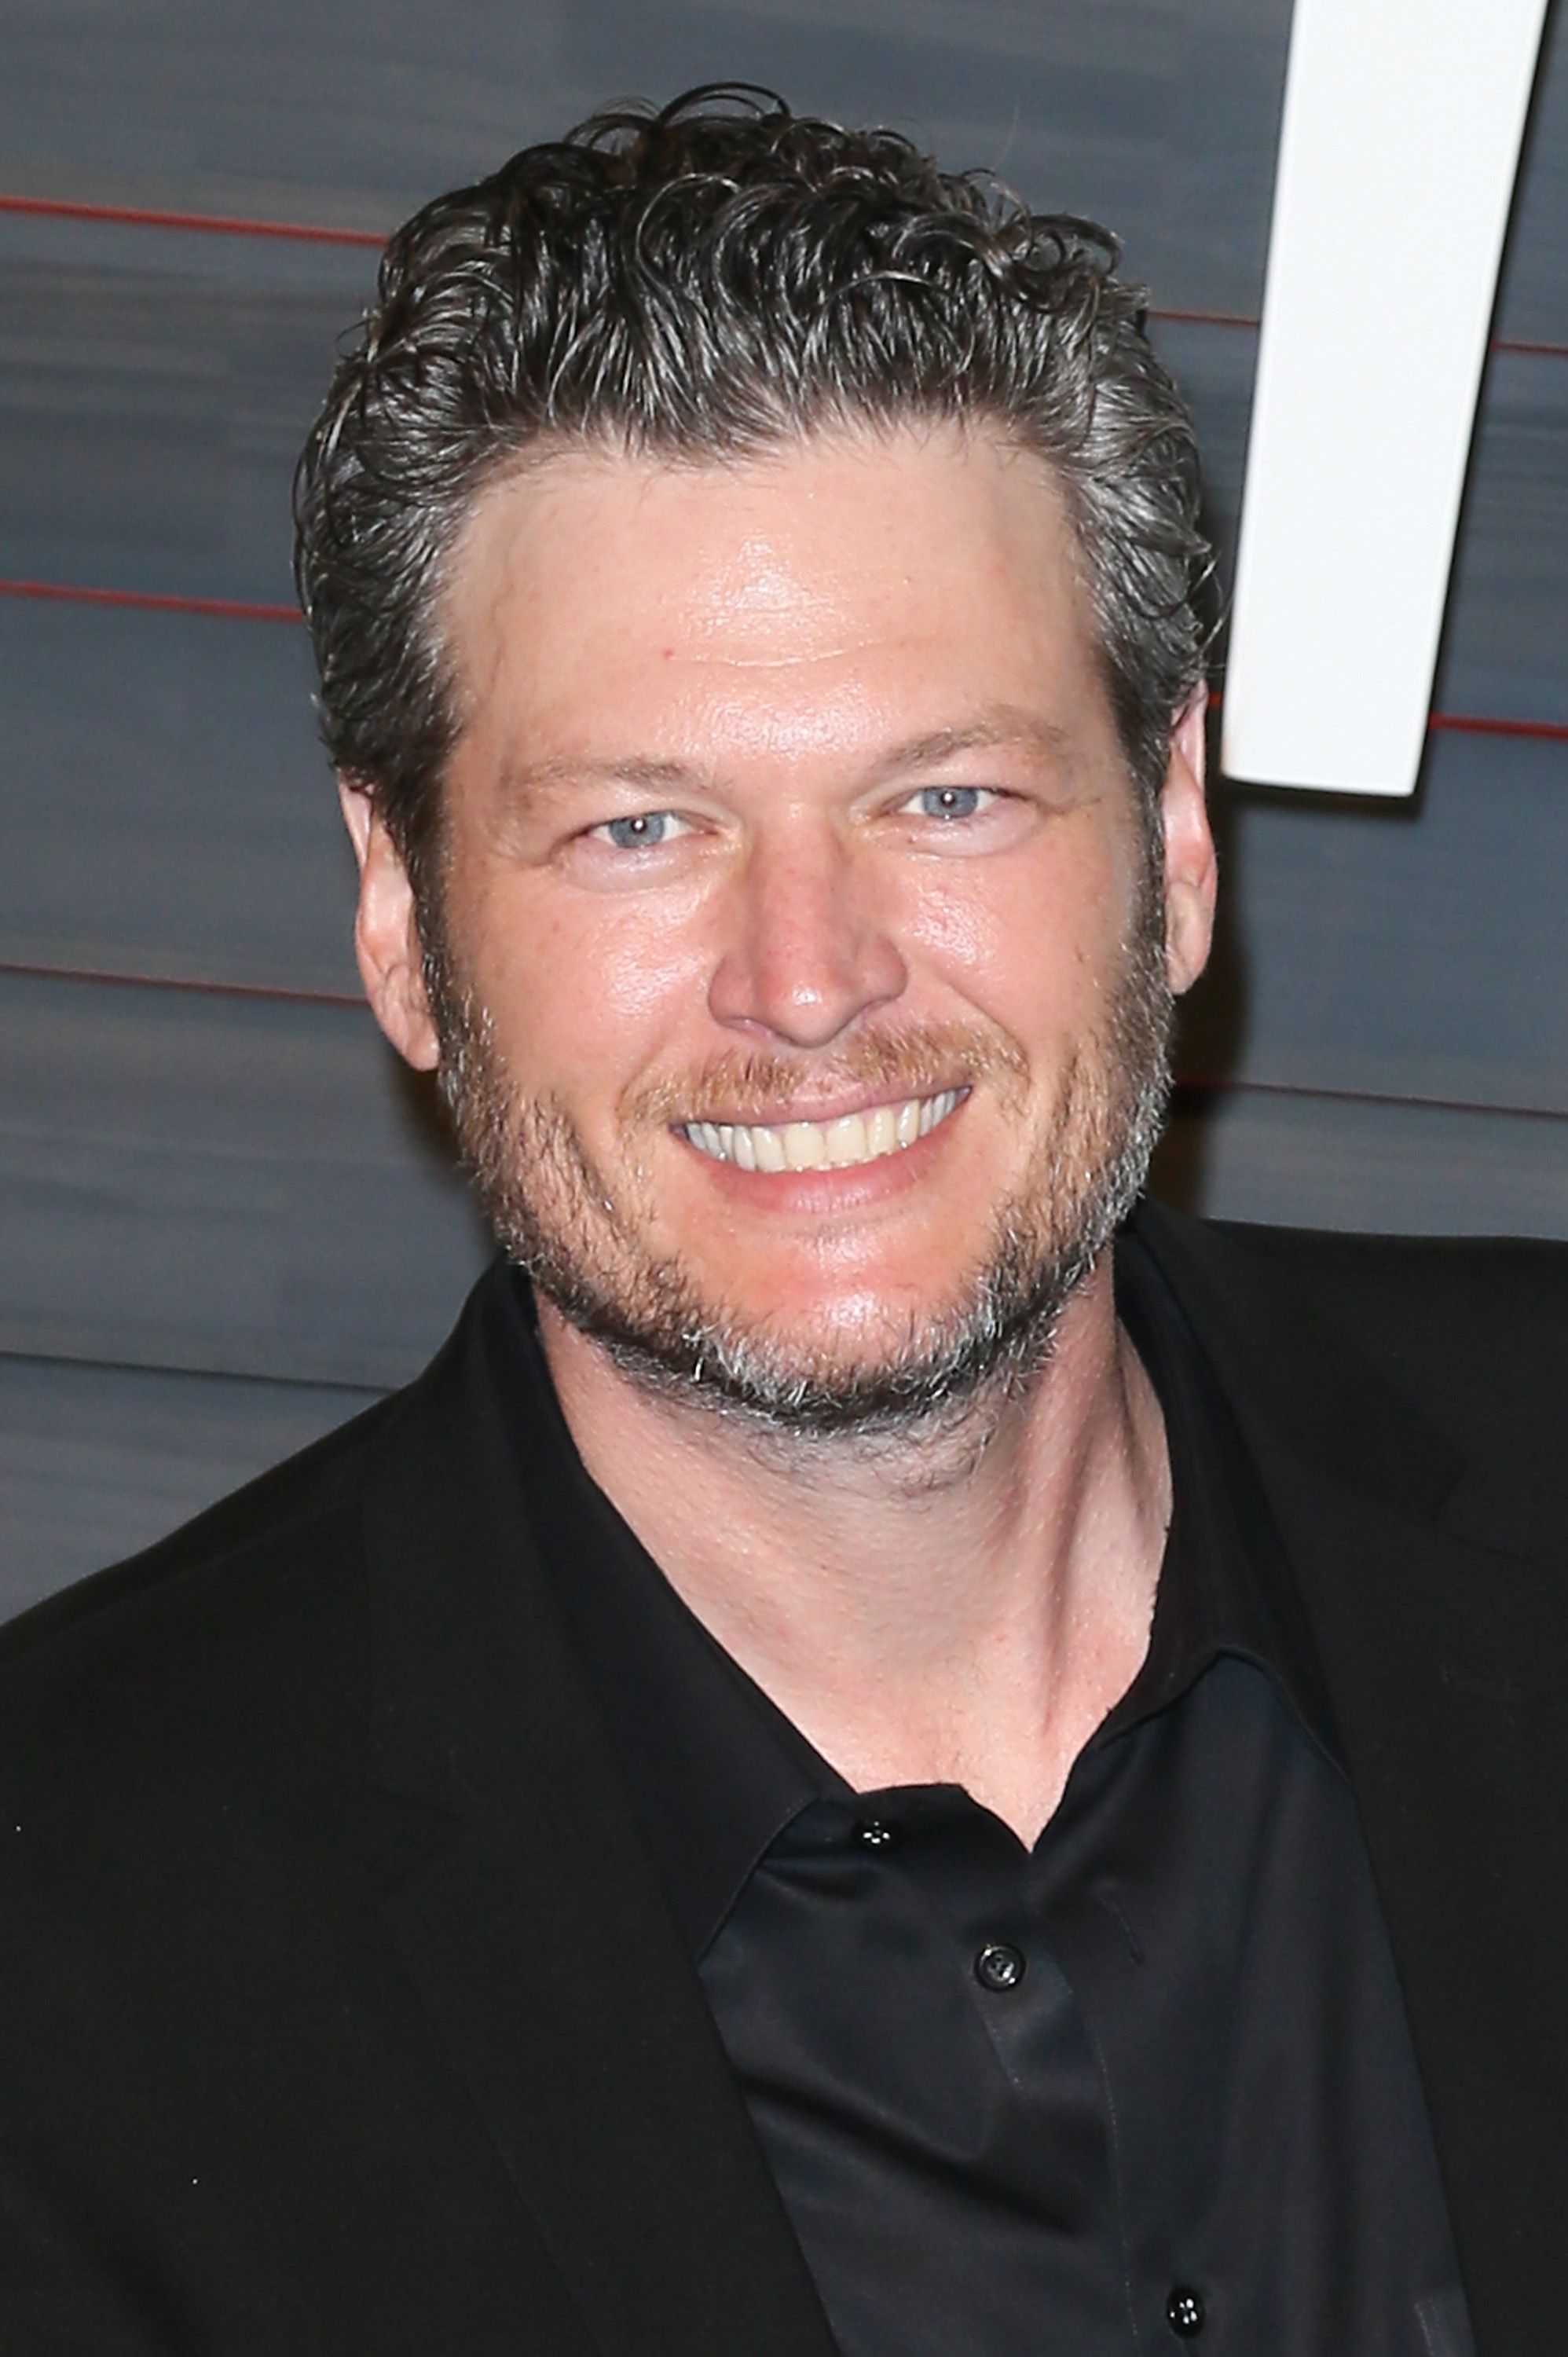 Blake Shelton arrives at the 2016 Vanity Fair Oscar Party Hosted by Graydon Carter at the Wallis Annenberg Center for the Performing Arts on February 28, 2016 in Beverly Hills, California | Photo: Getty Images